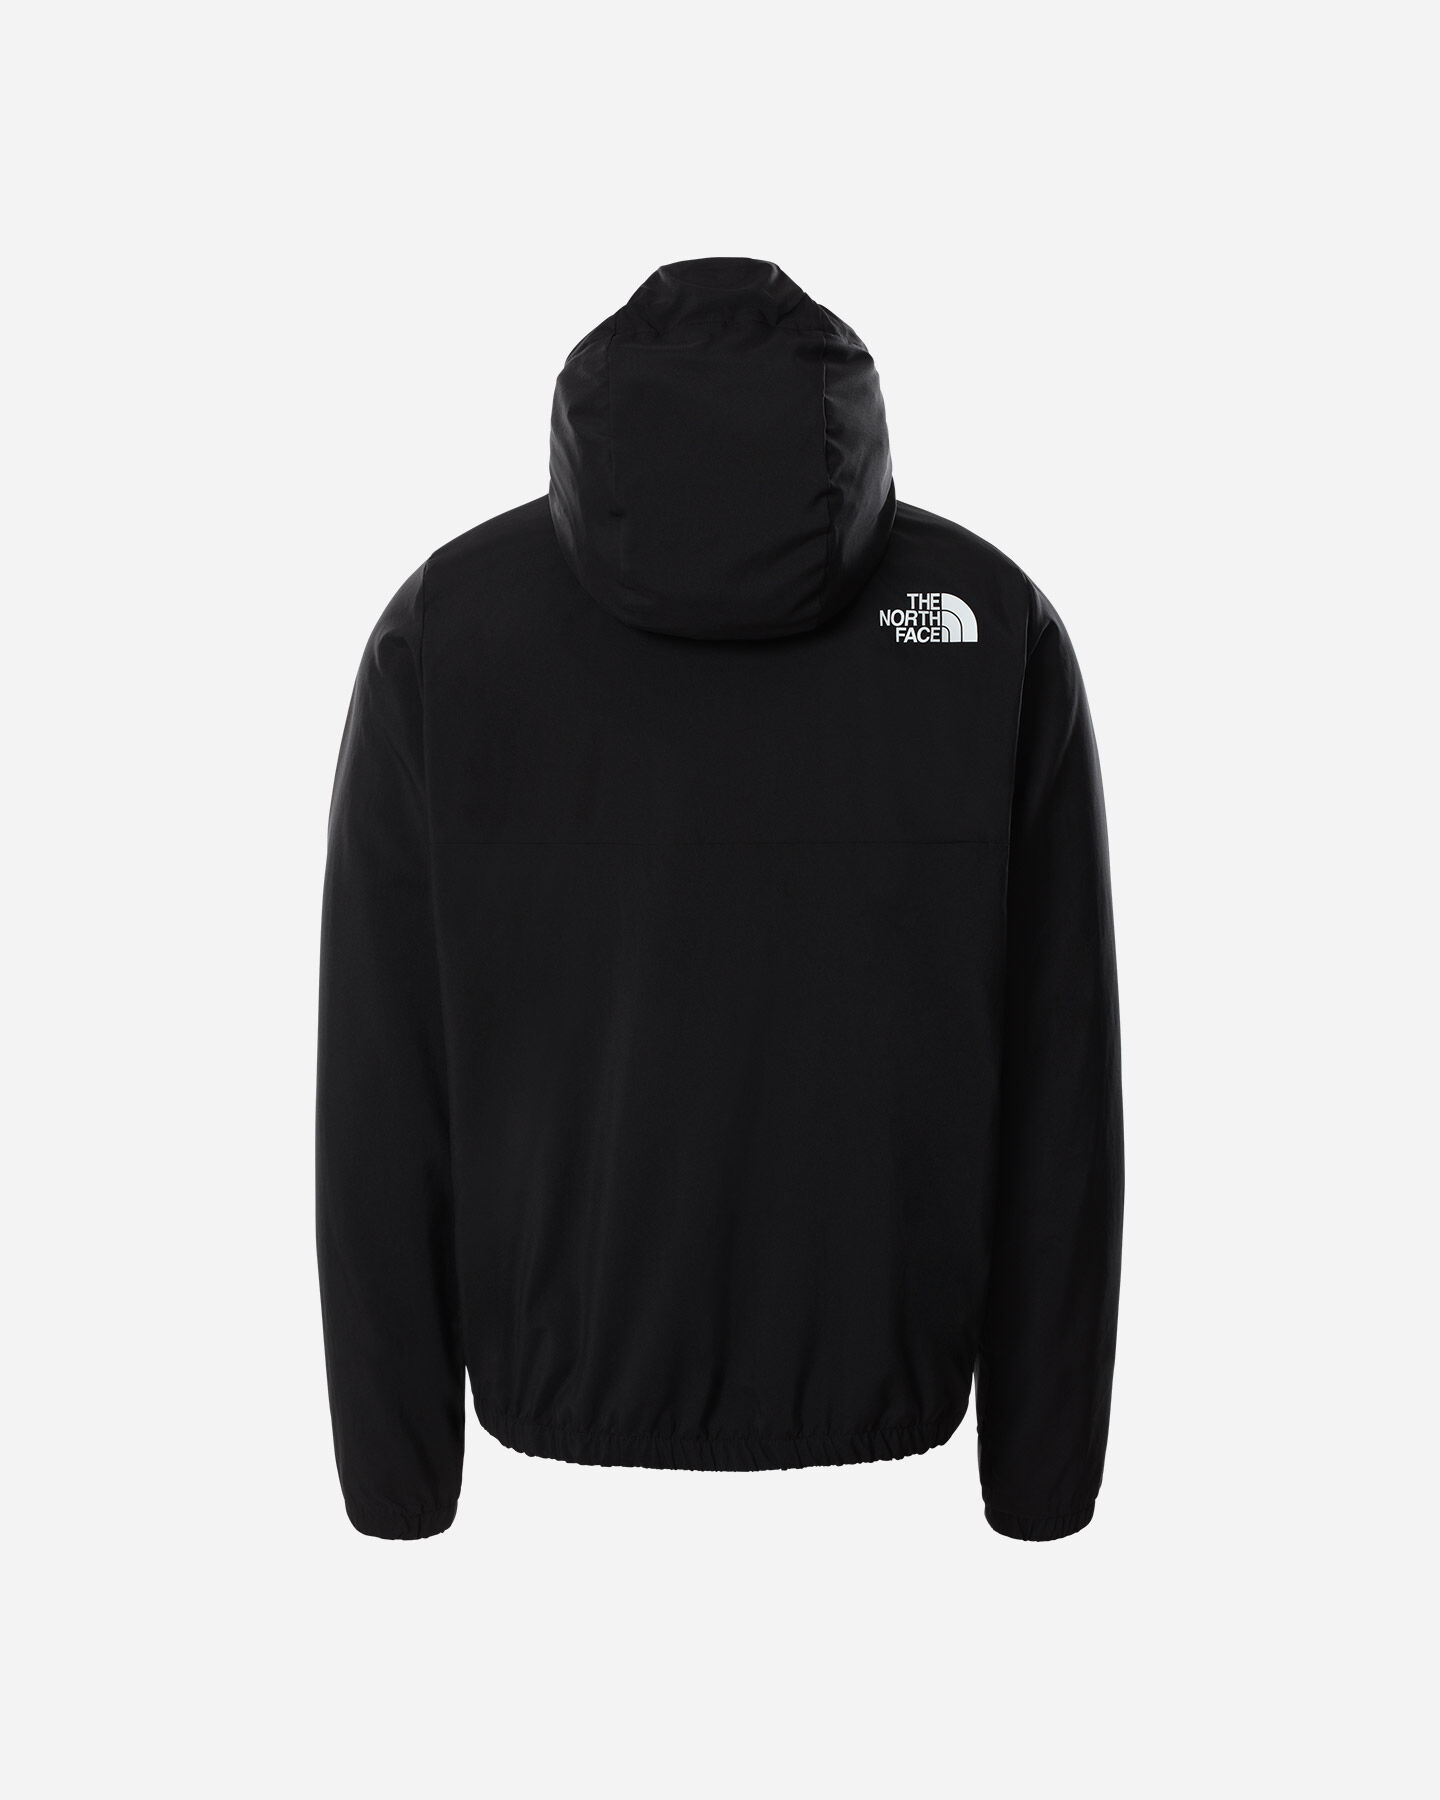  Felpa THE NORTH FACE ZIP HOODIE M S5348769|JK3|XS scatto 1